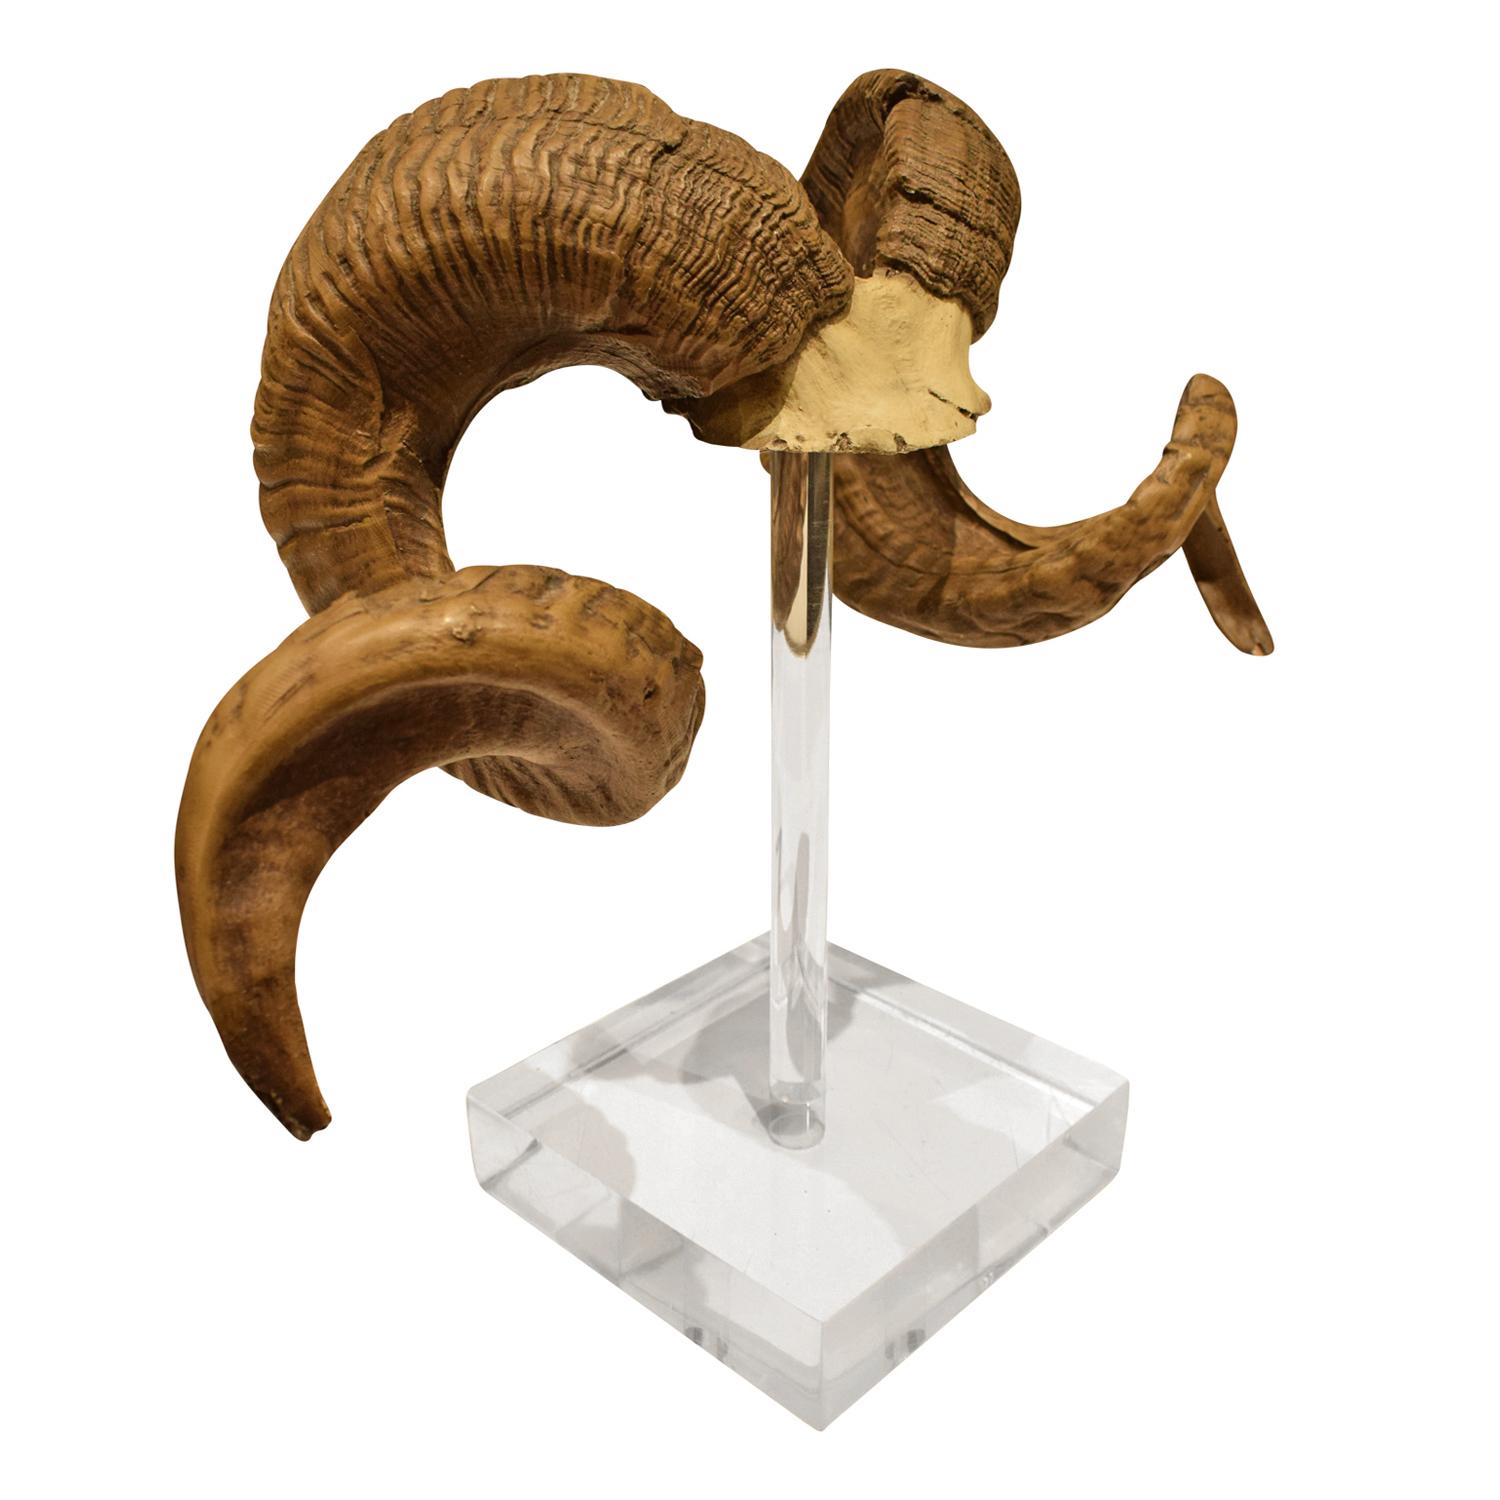 Set of ram horns mounted on a solid Lucite base, American, 1970s.